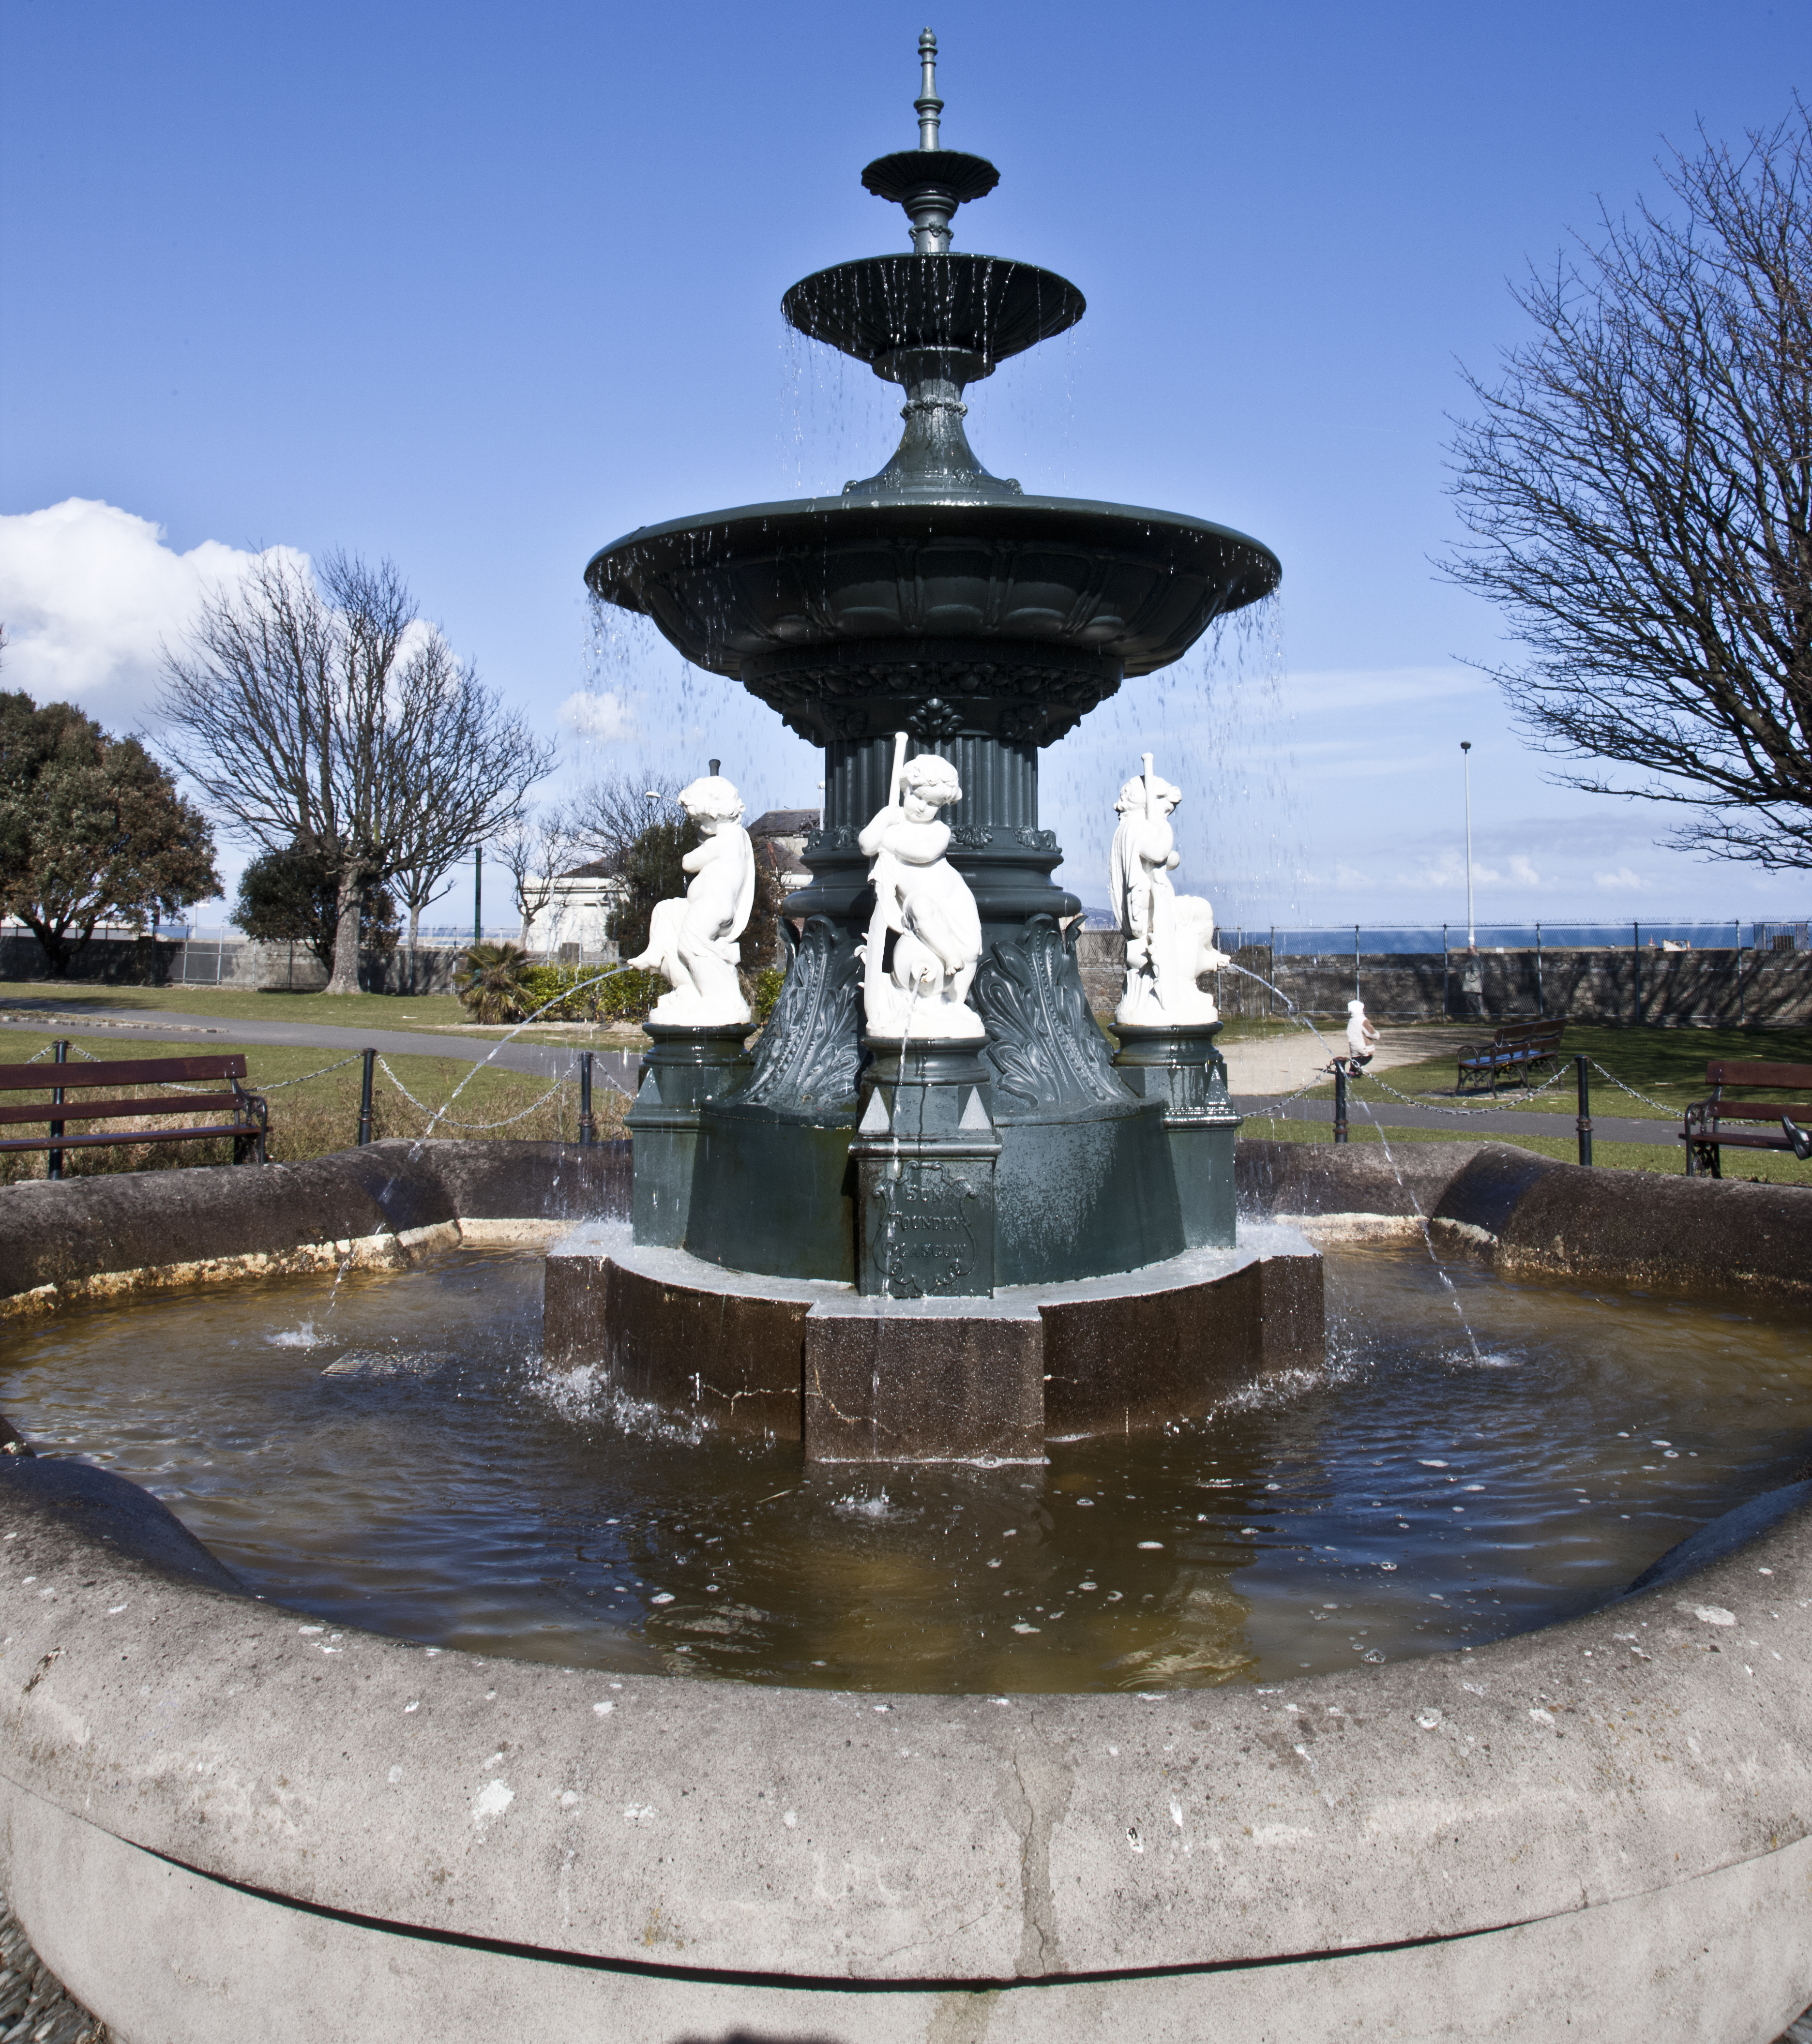 People's Park in Dún Laoghaire